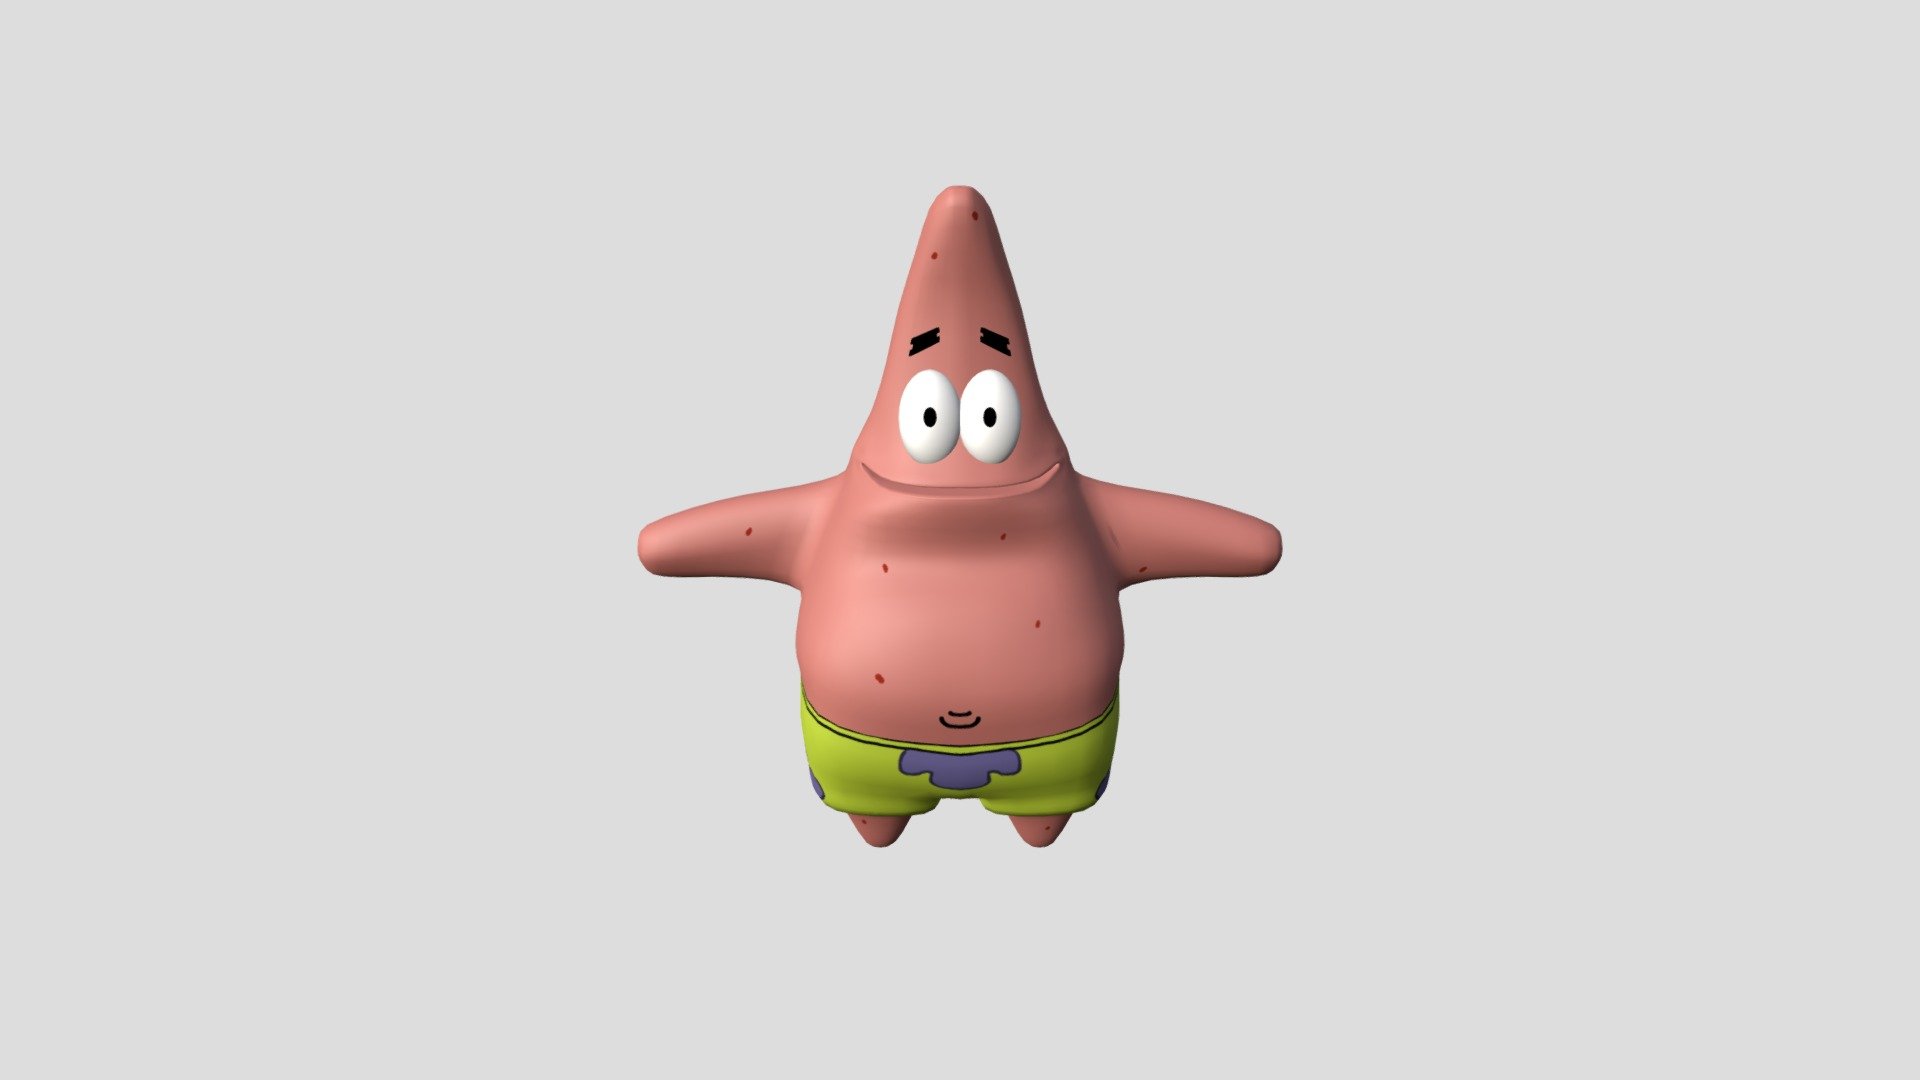 My rendition of Patrick Star from Spongebob Squarepants. Model was made in 3ds Max, and textures were drawn in Mudbox and Photoshop 3d model